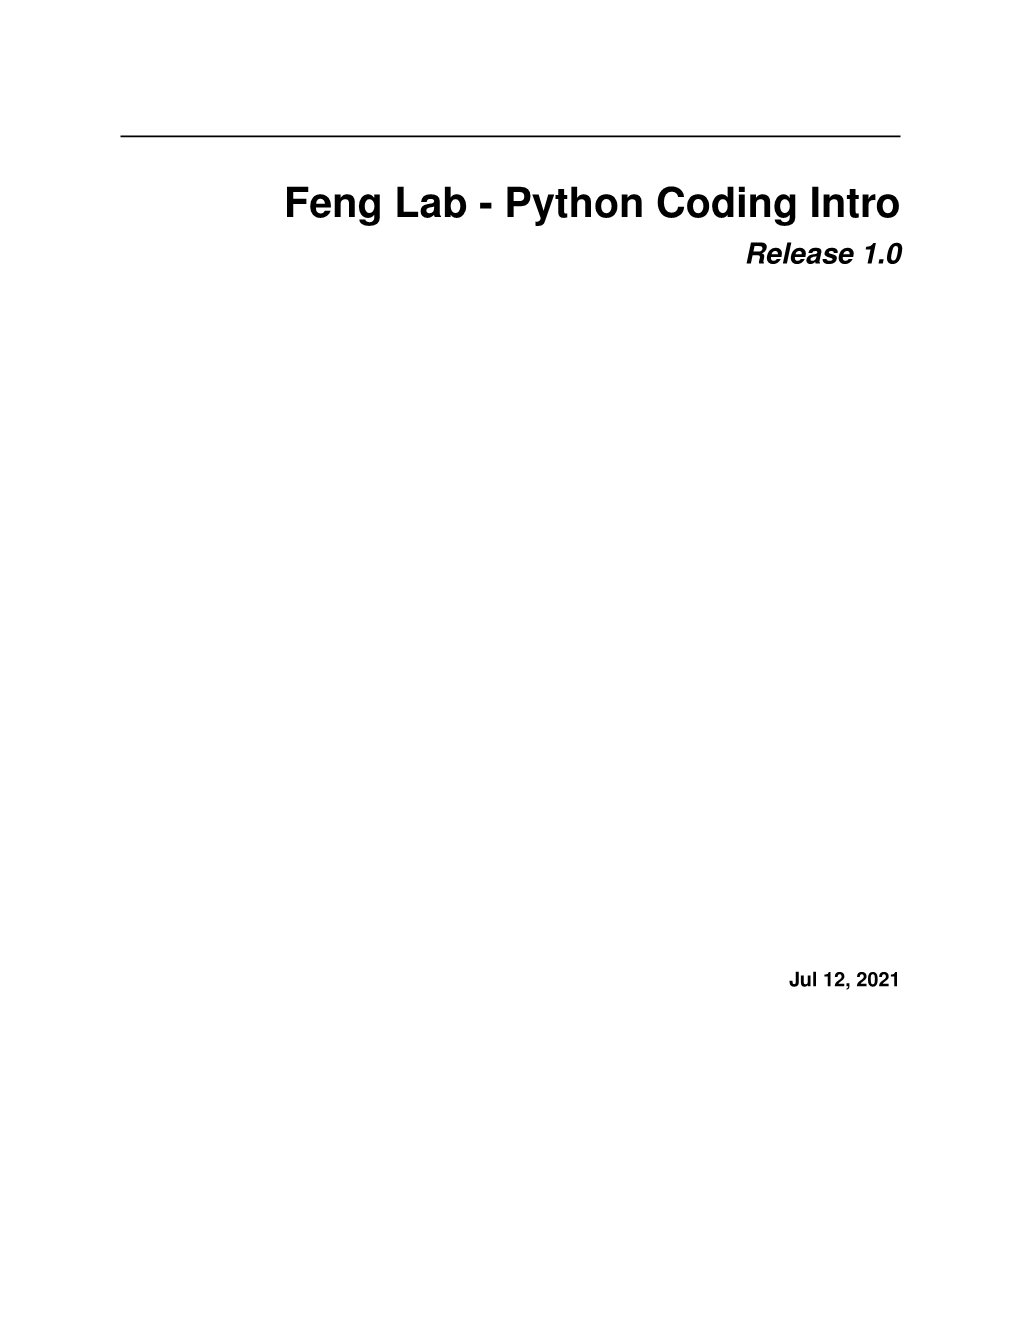 Feng Lab - Python Coding Intro Release 1.0